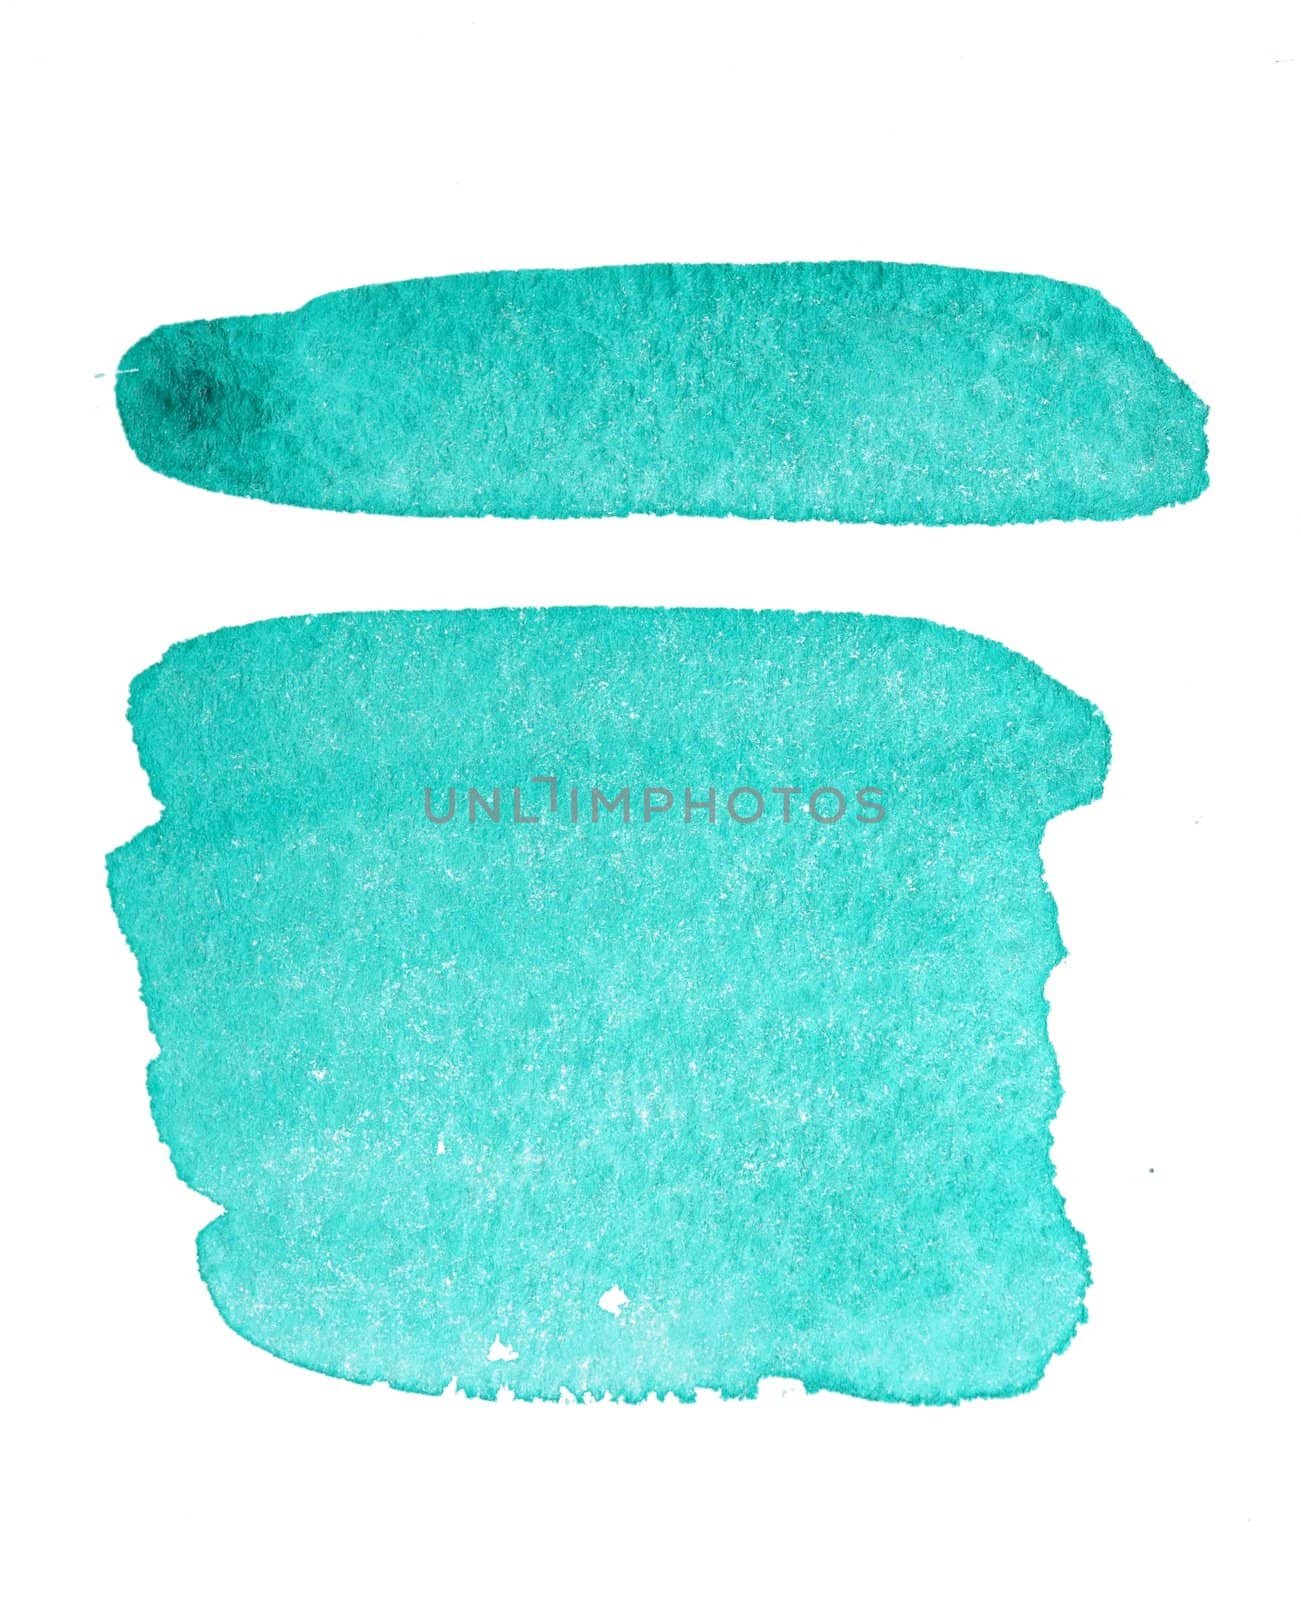 An image of bright turquoise trace on white paper